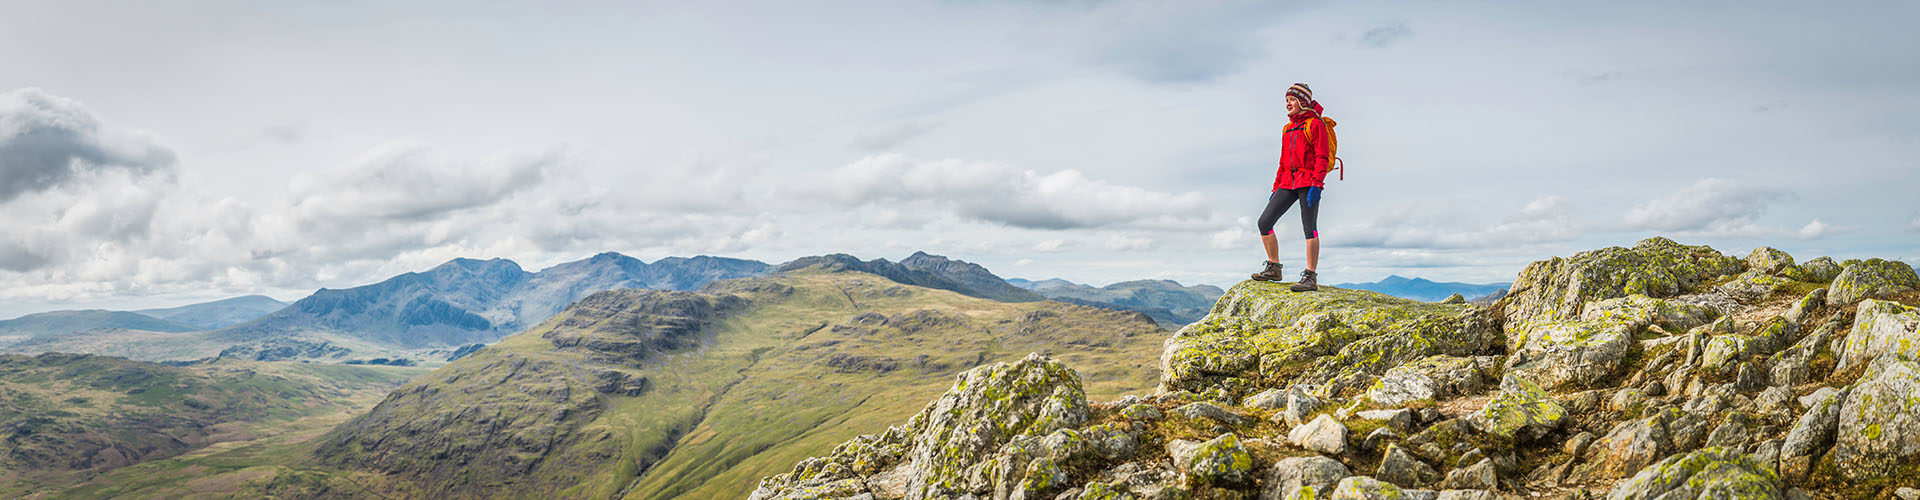 Teenage girl hiker standing on a mountain summit overlooking a panoramic vista of green valleys and rocky peaks high in the picturesque natural landscape of the Lake District National Park, Cumbria, UK. ProPhoto RGB profile for maximum color fidelity and gamut.